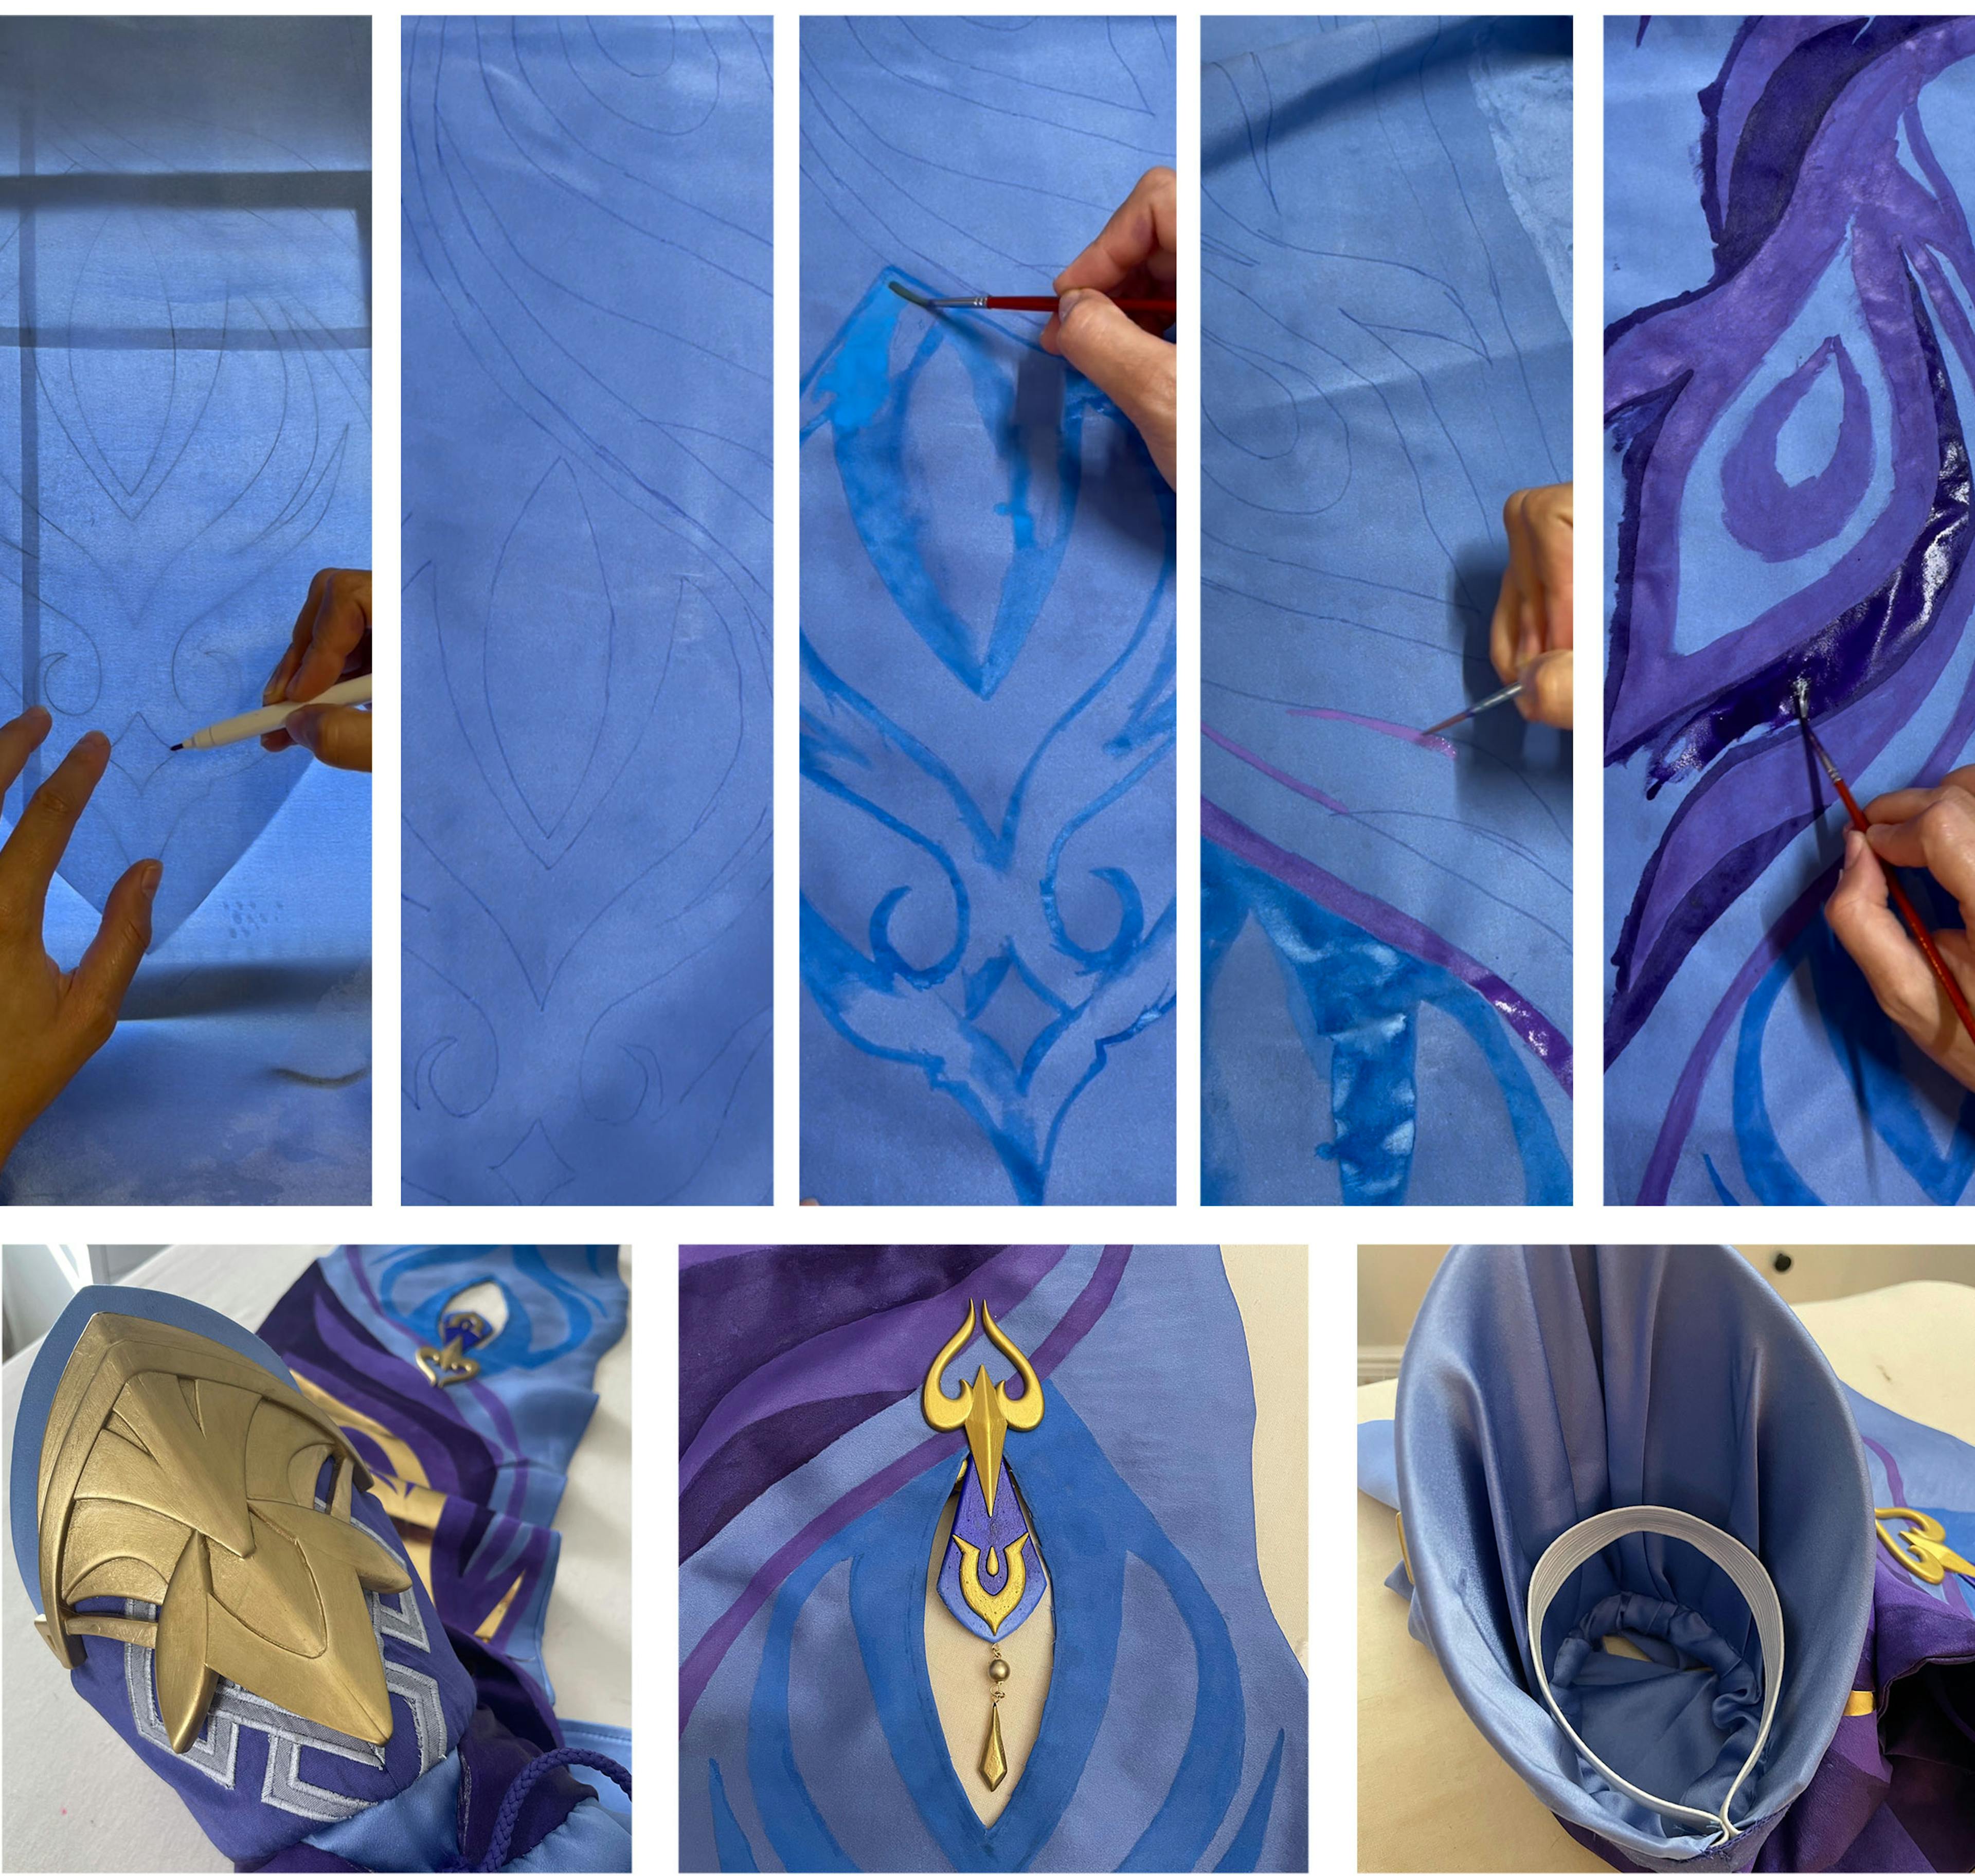 Keqing cosplay construction details sleeve painting